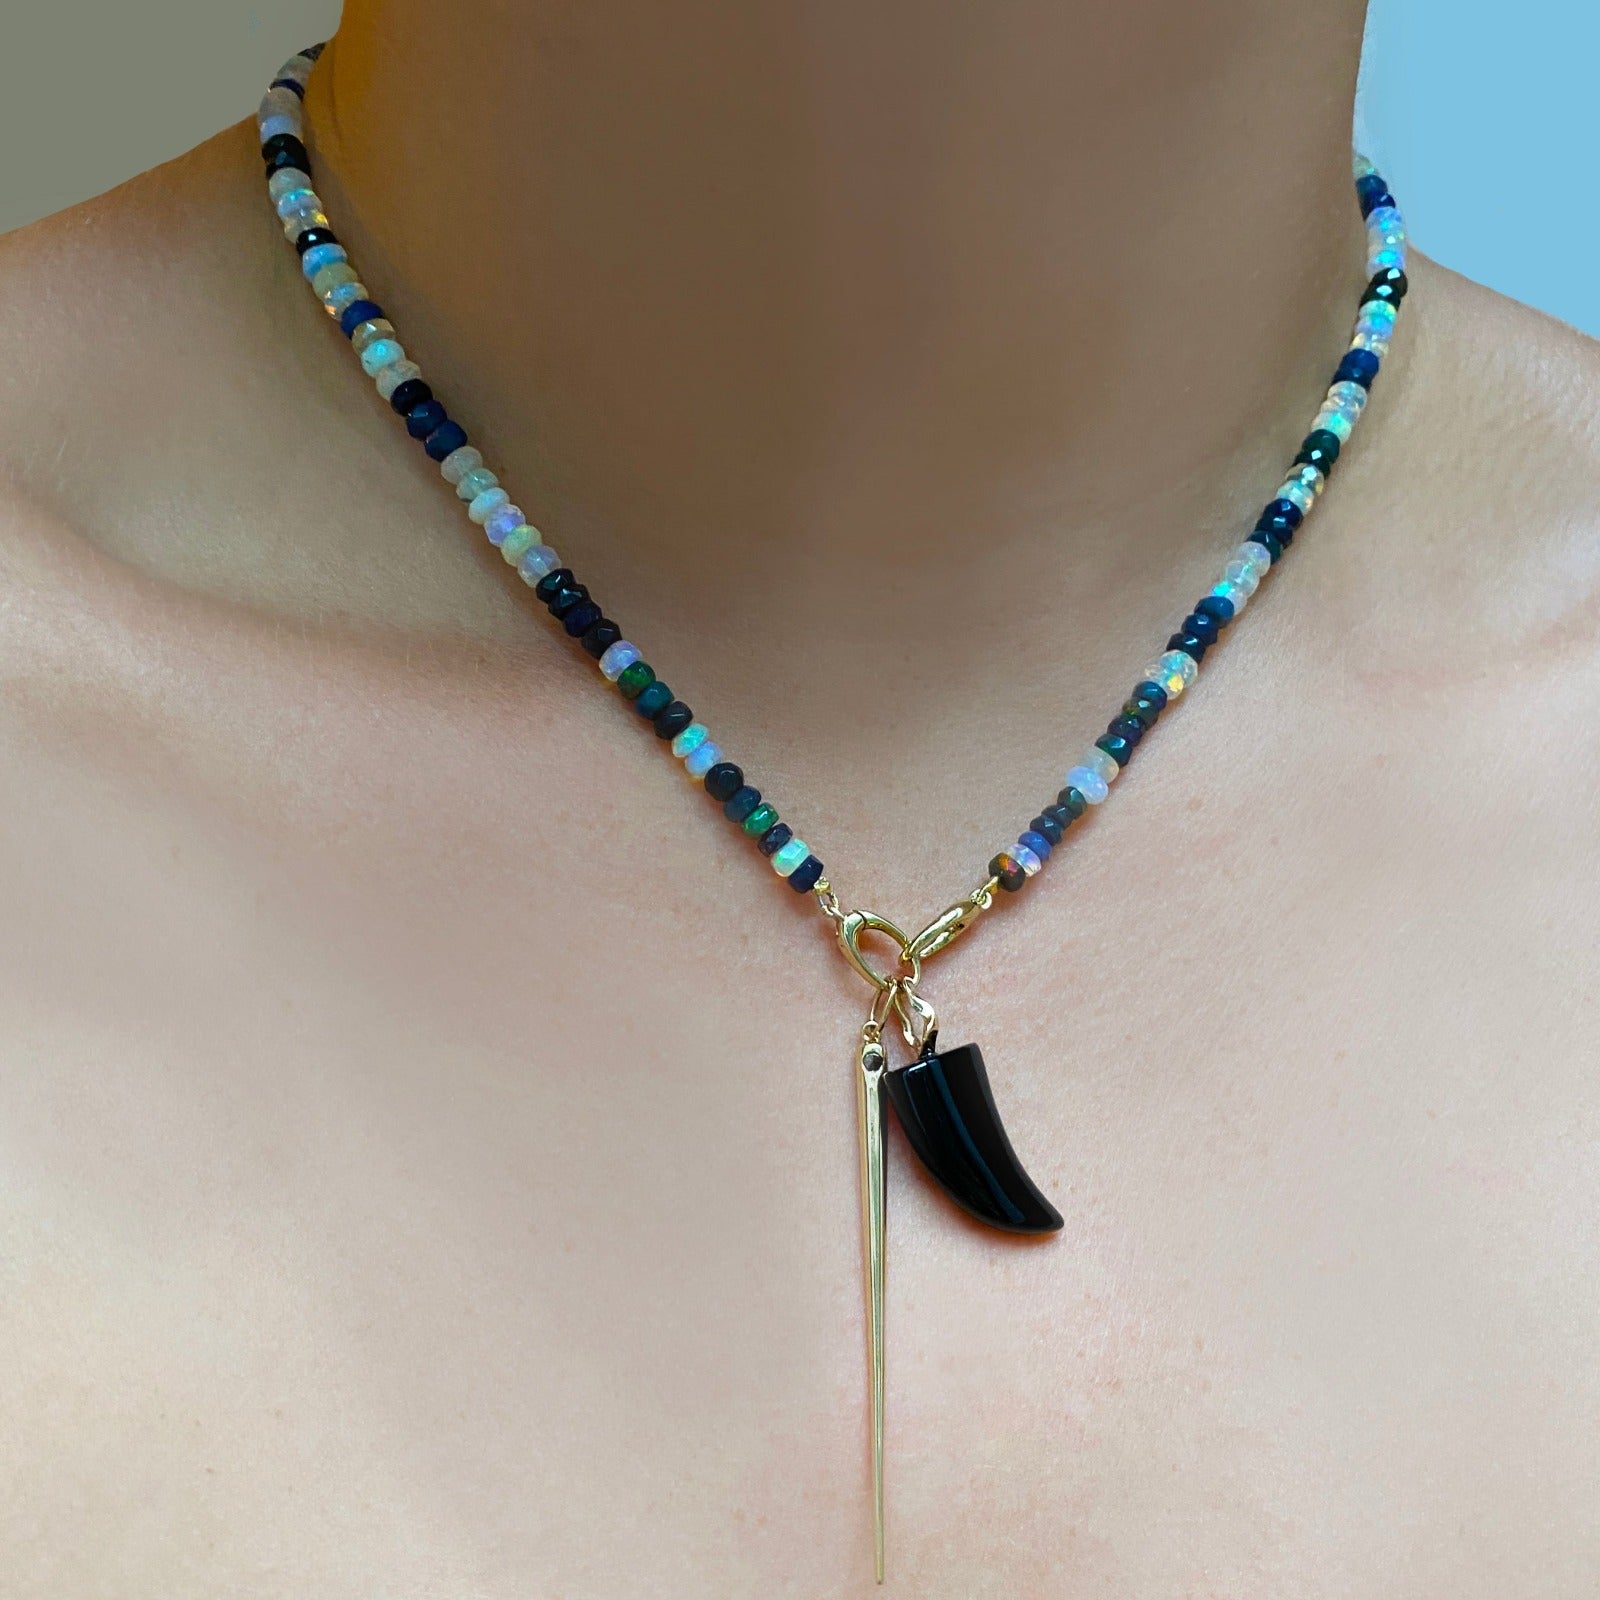 Shimmering beaded necklace made of faceted opals in shades of fiery pastels, grey, teal, and black on a gold linking ovals clasp. Styled on a neck layered with a horn and quill spike charm. 